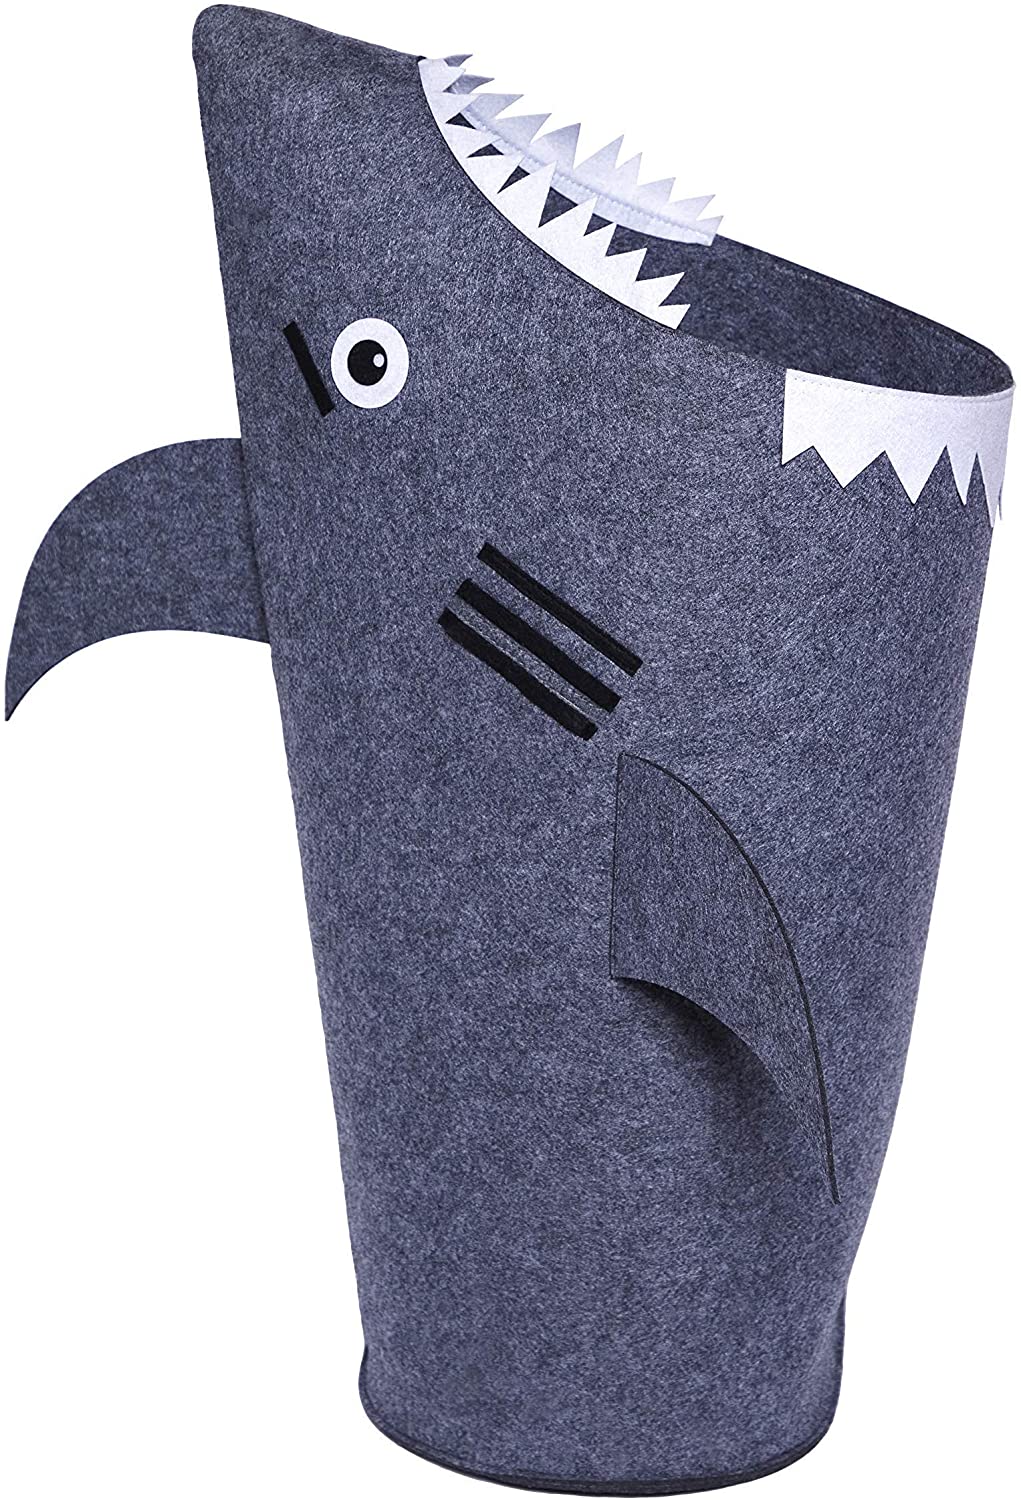 Baby Shark Laundry Basket for Kids for bedroom and bathroom - Grey